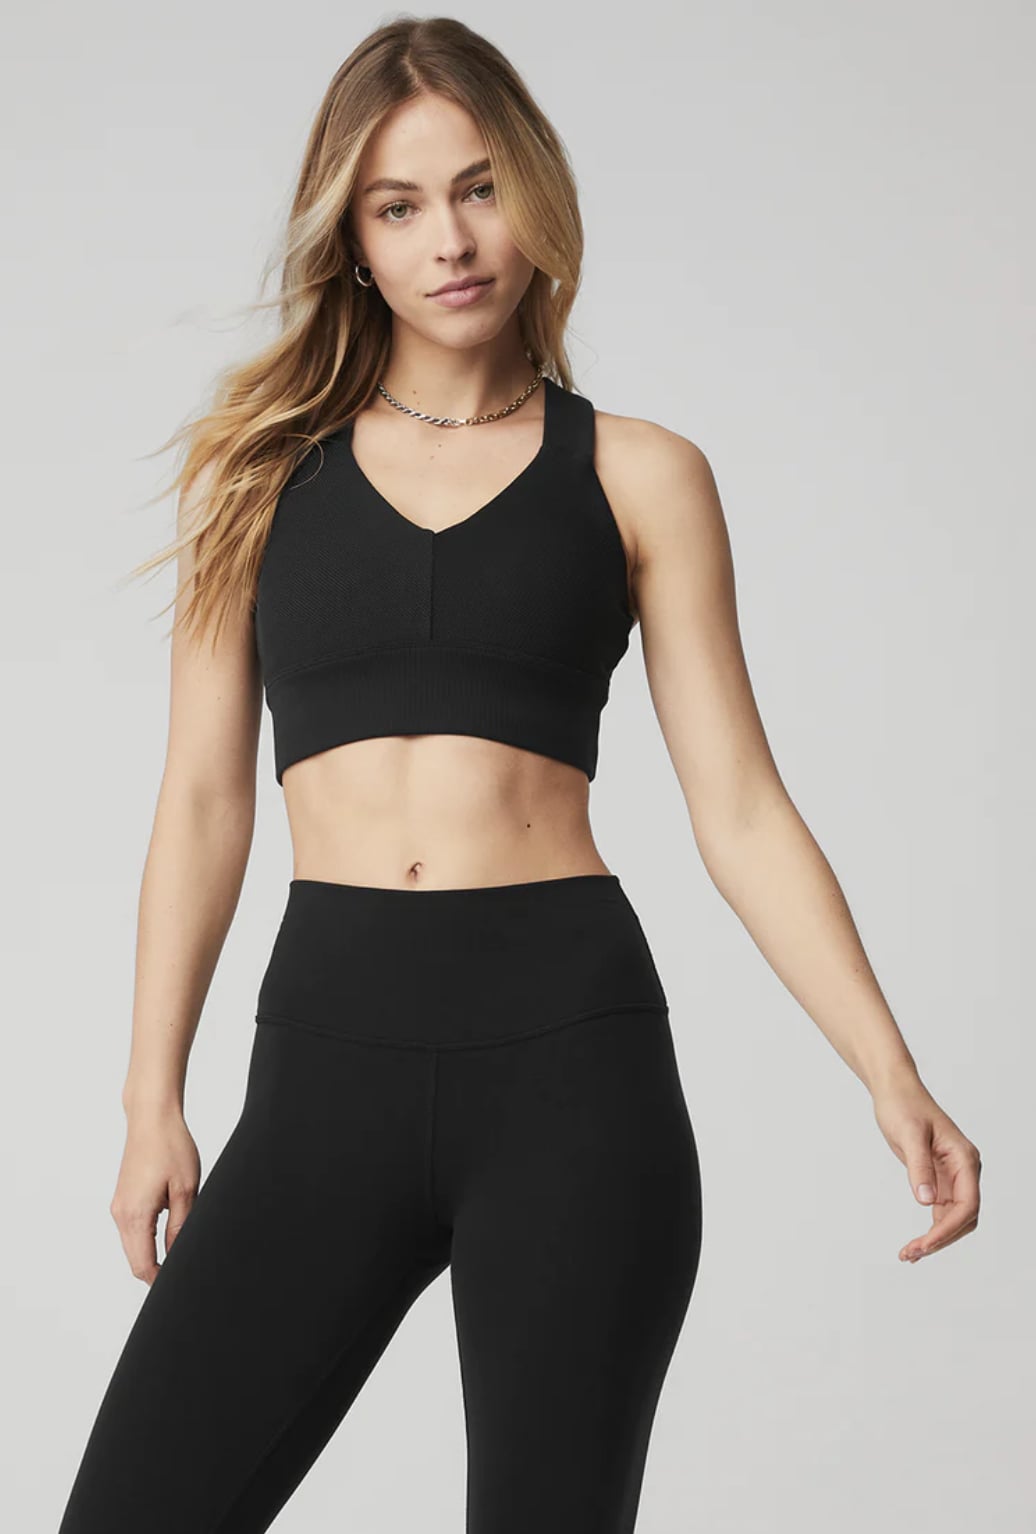 The Sports Bra With a 5K Person Waitlist Is Back In Stock (With Major  Upgrades) - PureWow